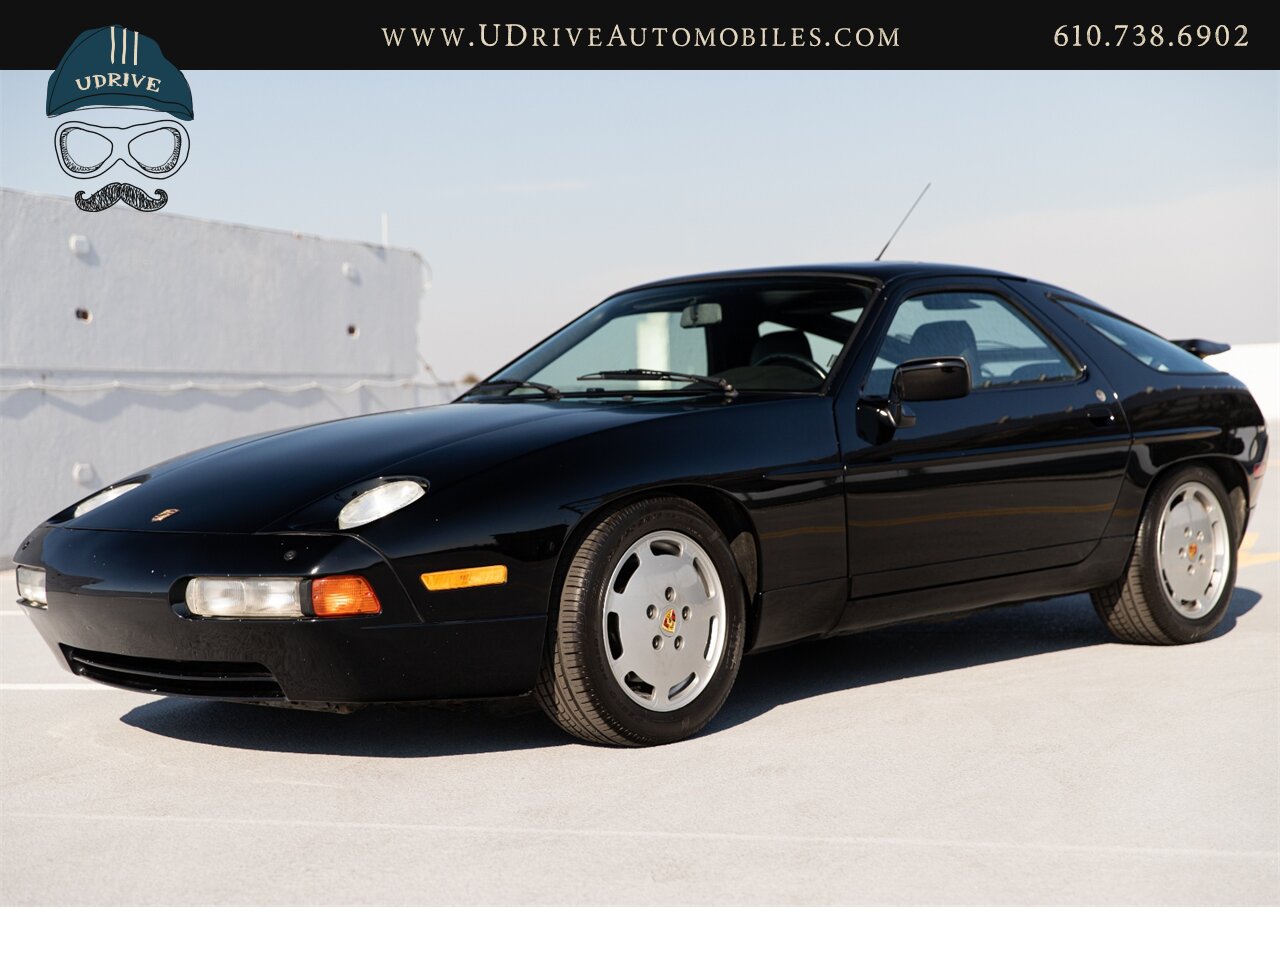 1990 Porsche 928 S4 $58k in Service History Since 2014   - Photo 7 - West Chester, PA 19382